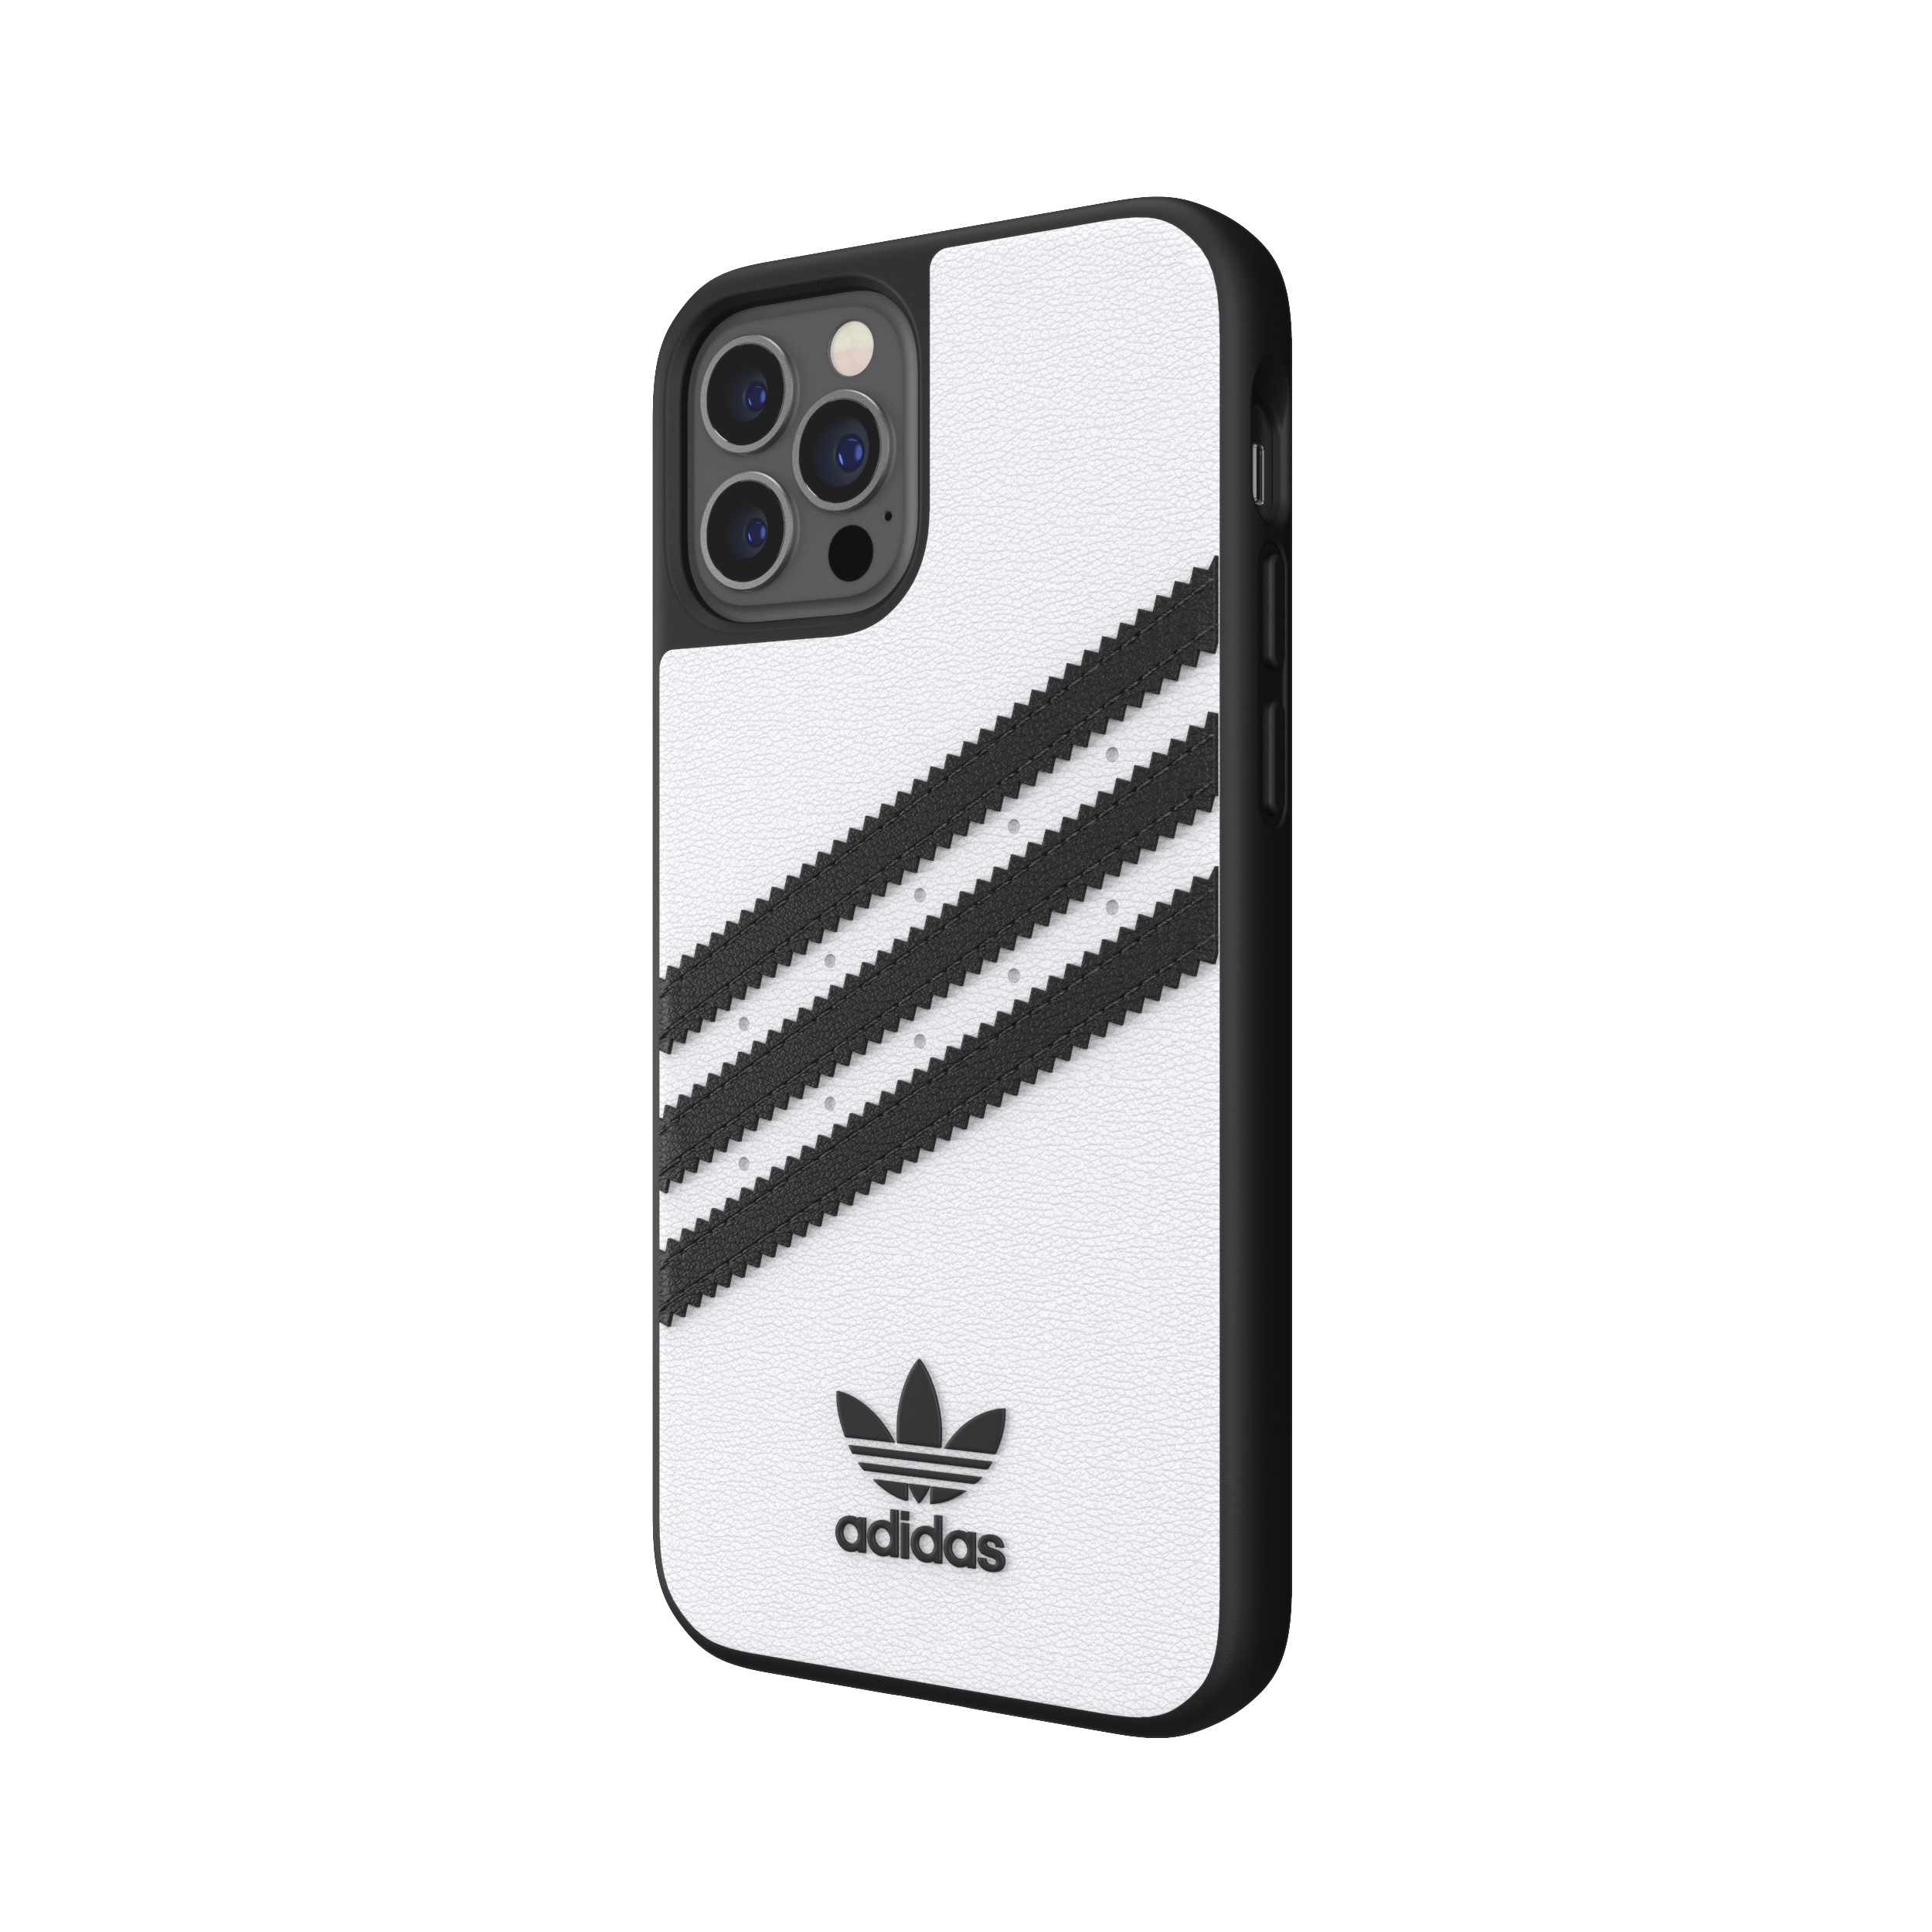 Case, ADIDAS 12 12, Weiß/Schwarz Backcover, Moulded Pro, ORIGINALS iPhone Apple, iPhone